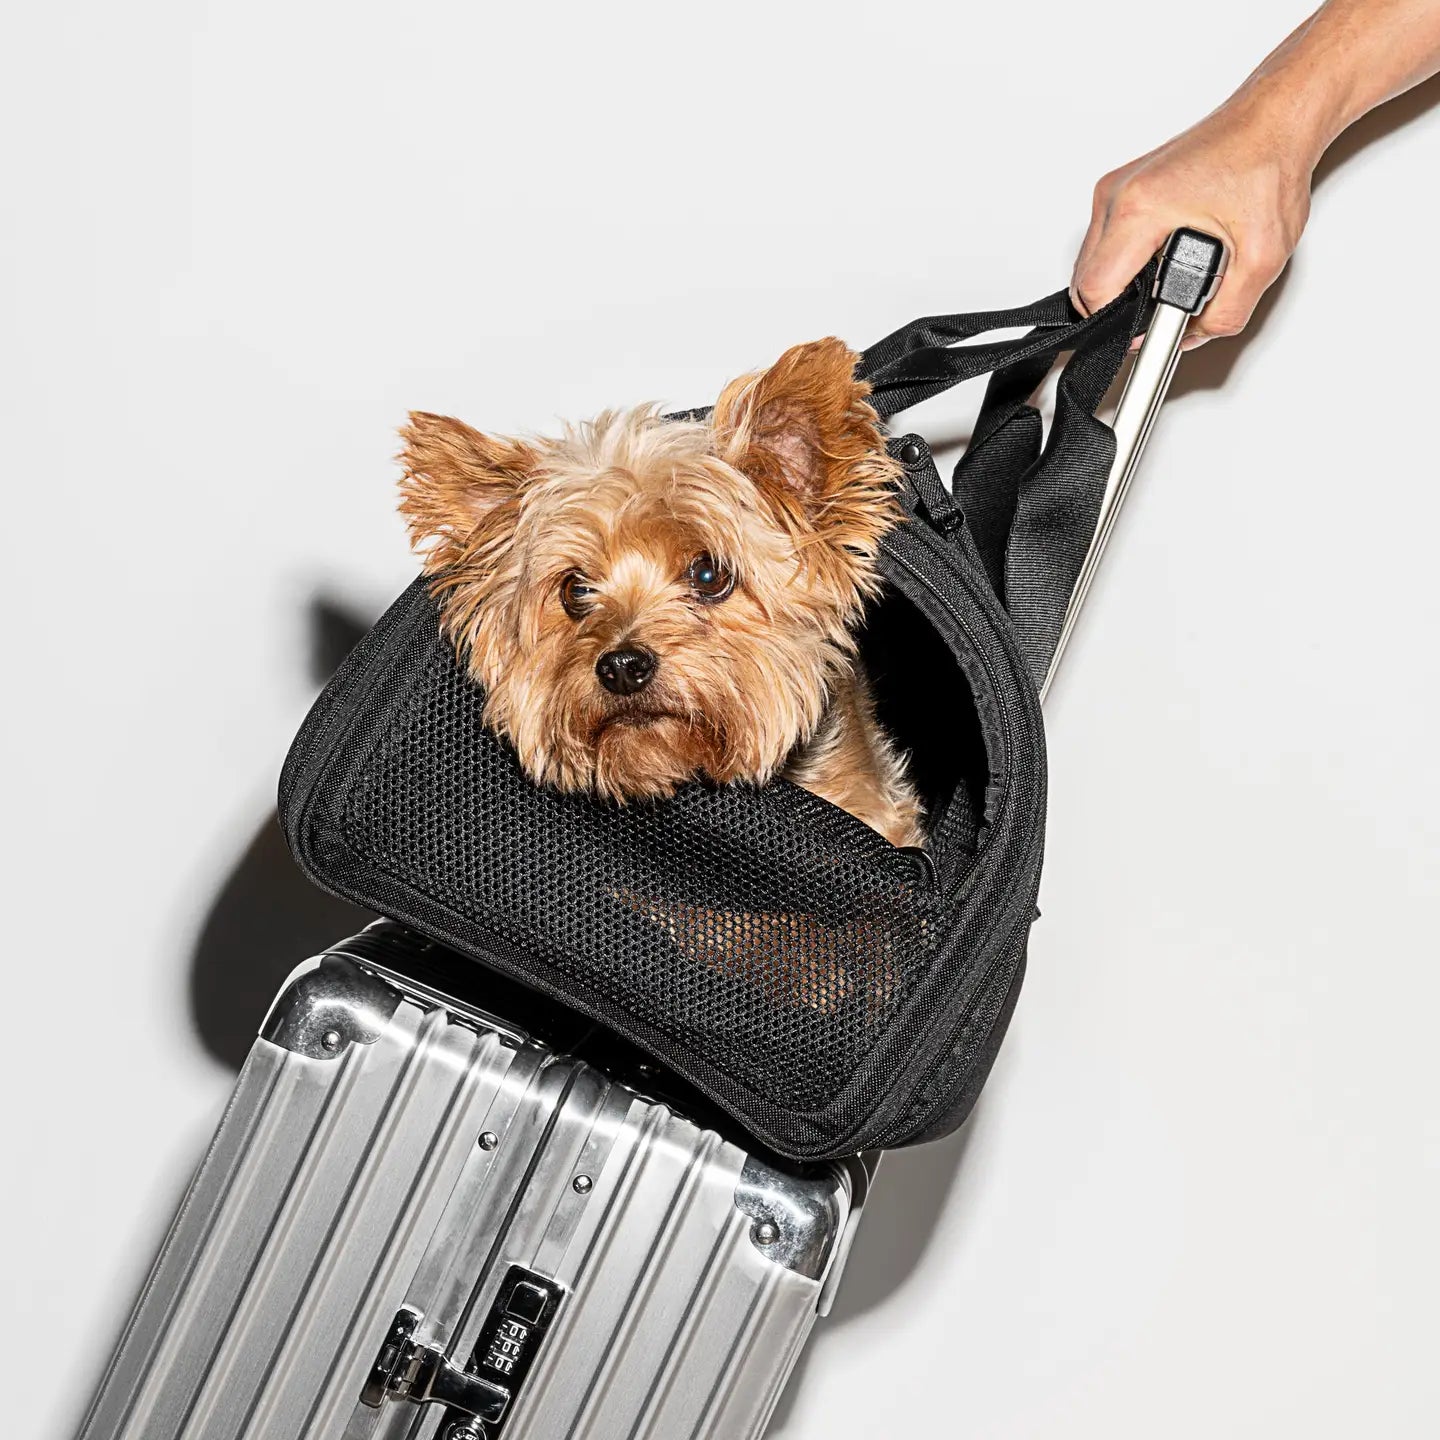 Travel accessories for dogs